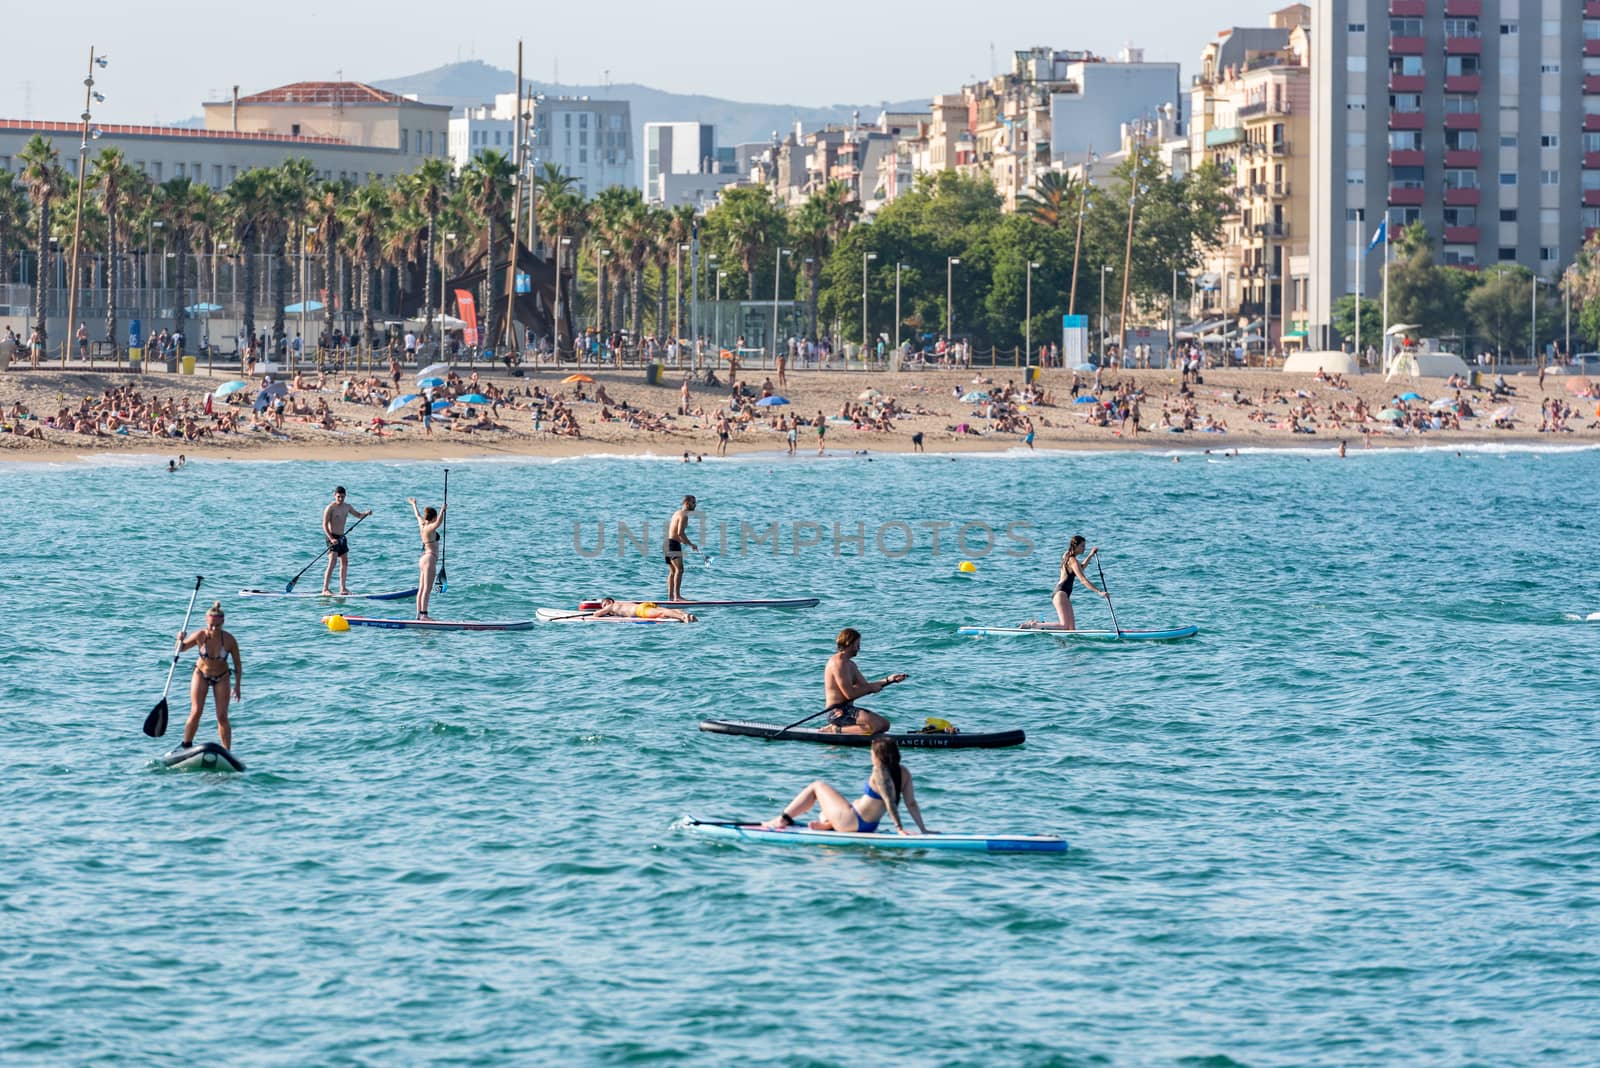 People riding Paddle Surf after COVID 19 La Barceloneta in Barce by martinscphoto